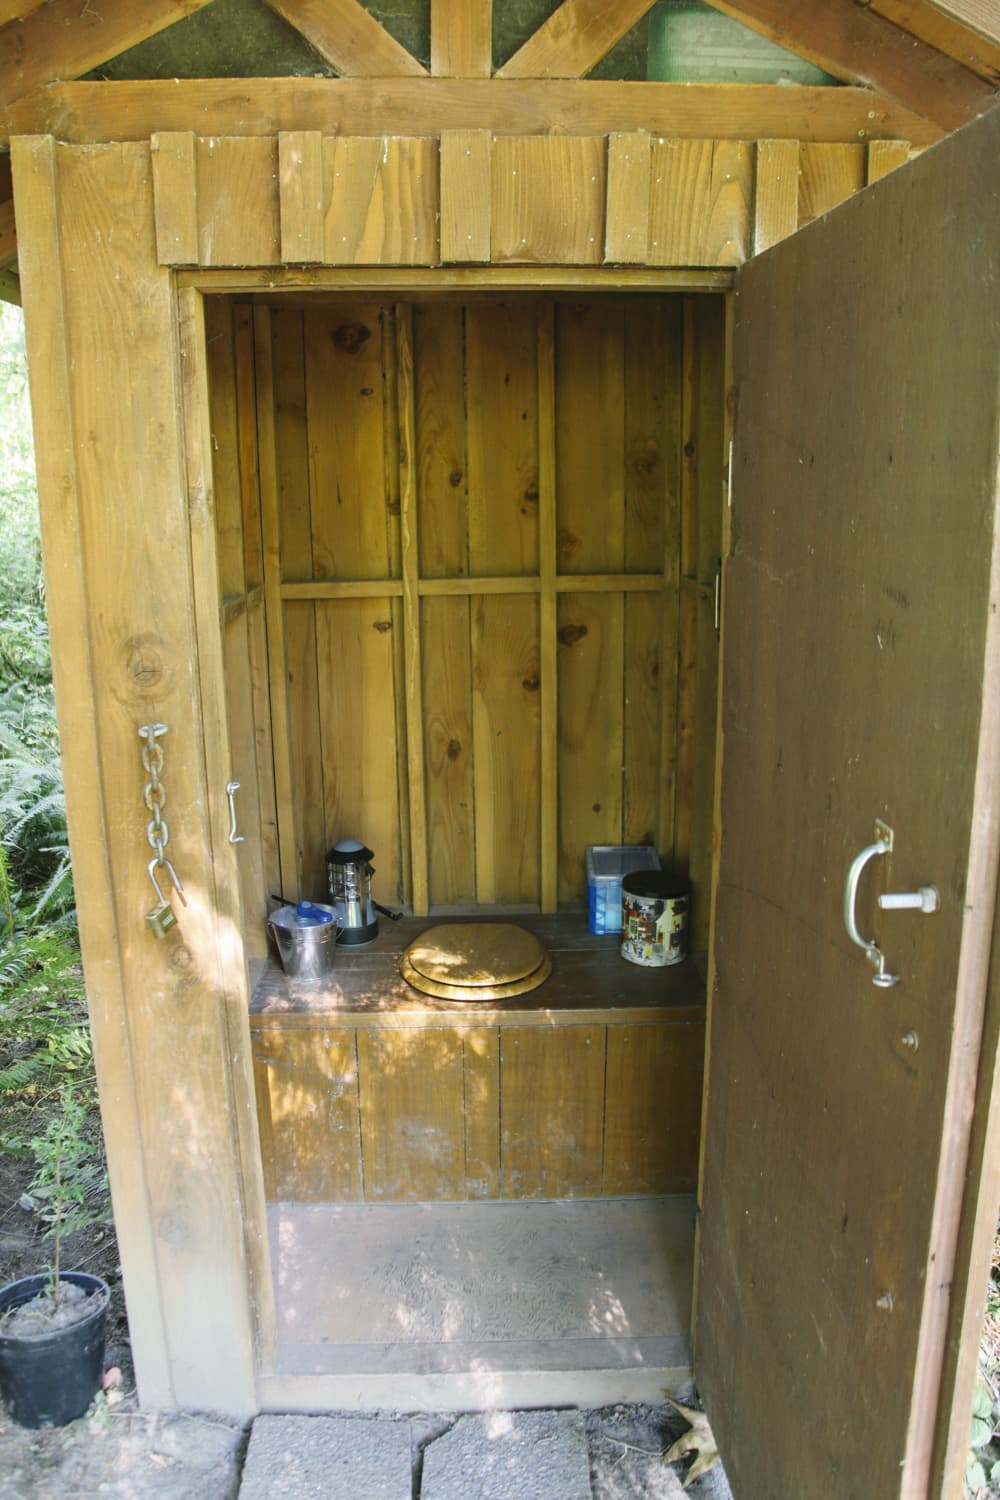 The outhouse was very well maintained and nice to use!